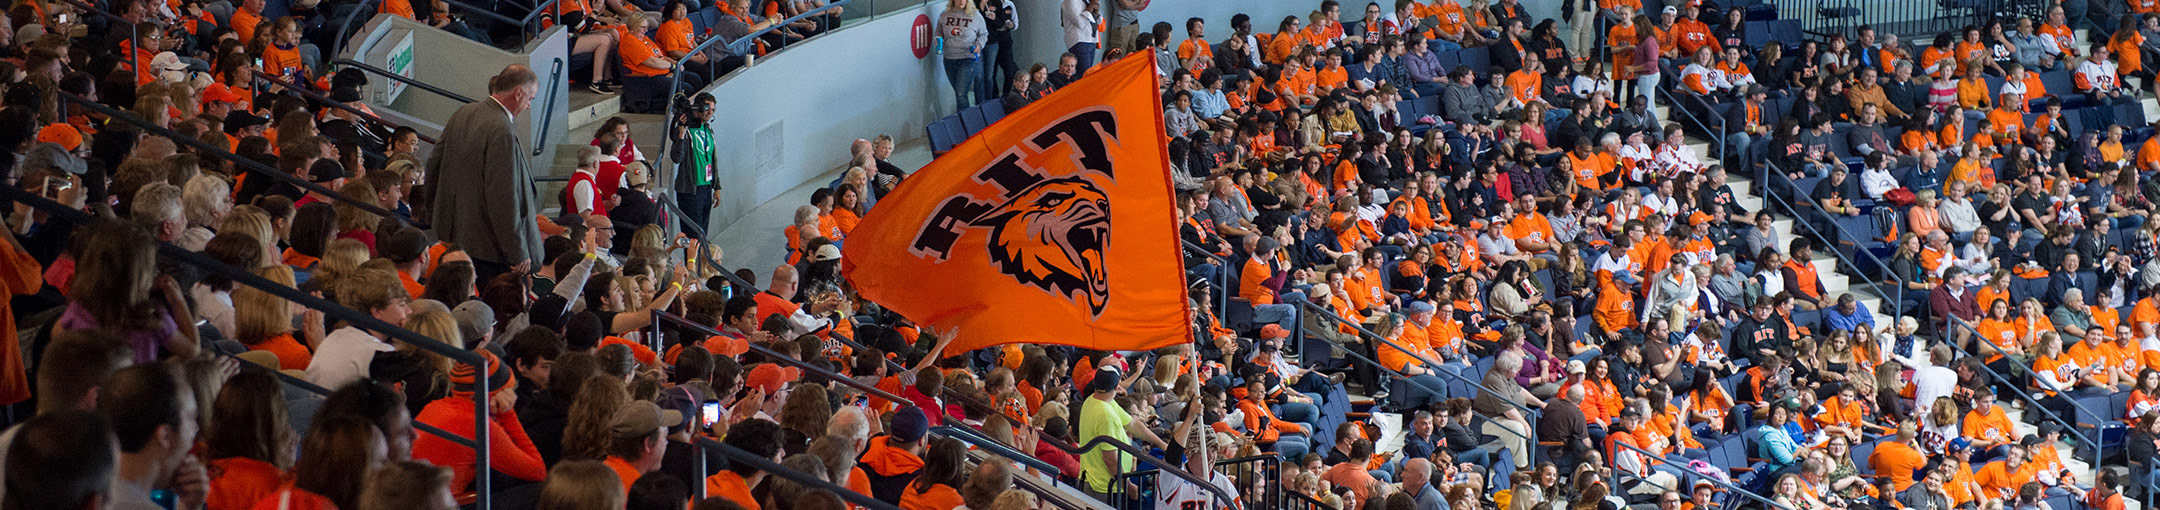 A student waving the RIT Tiger flag in the corner crew section at an RIT hockey game